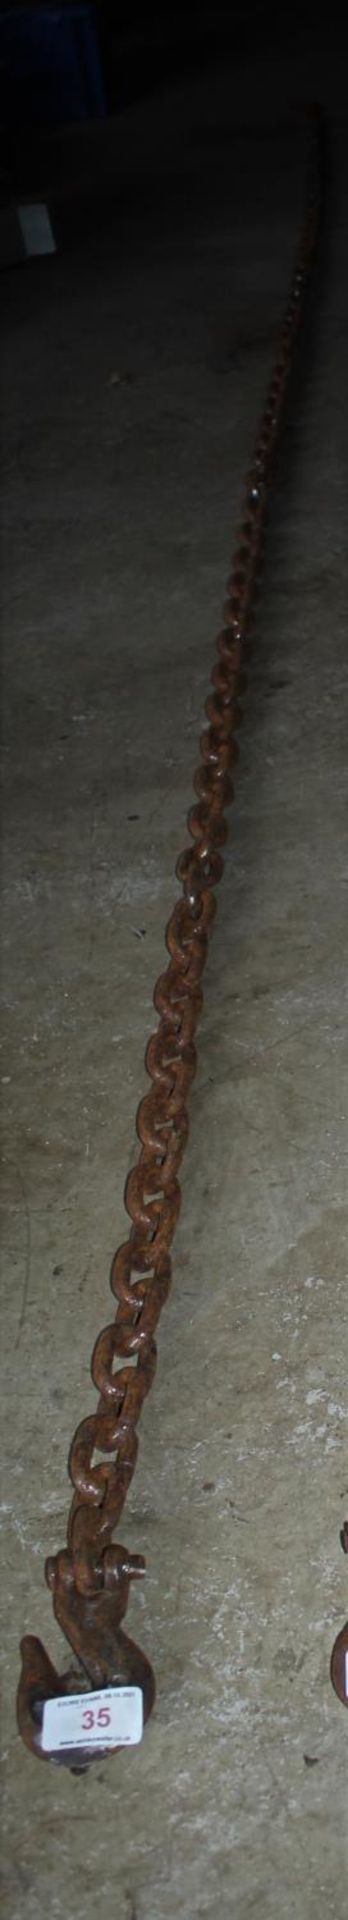 A CHAIN 14'6"IN LENGTH